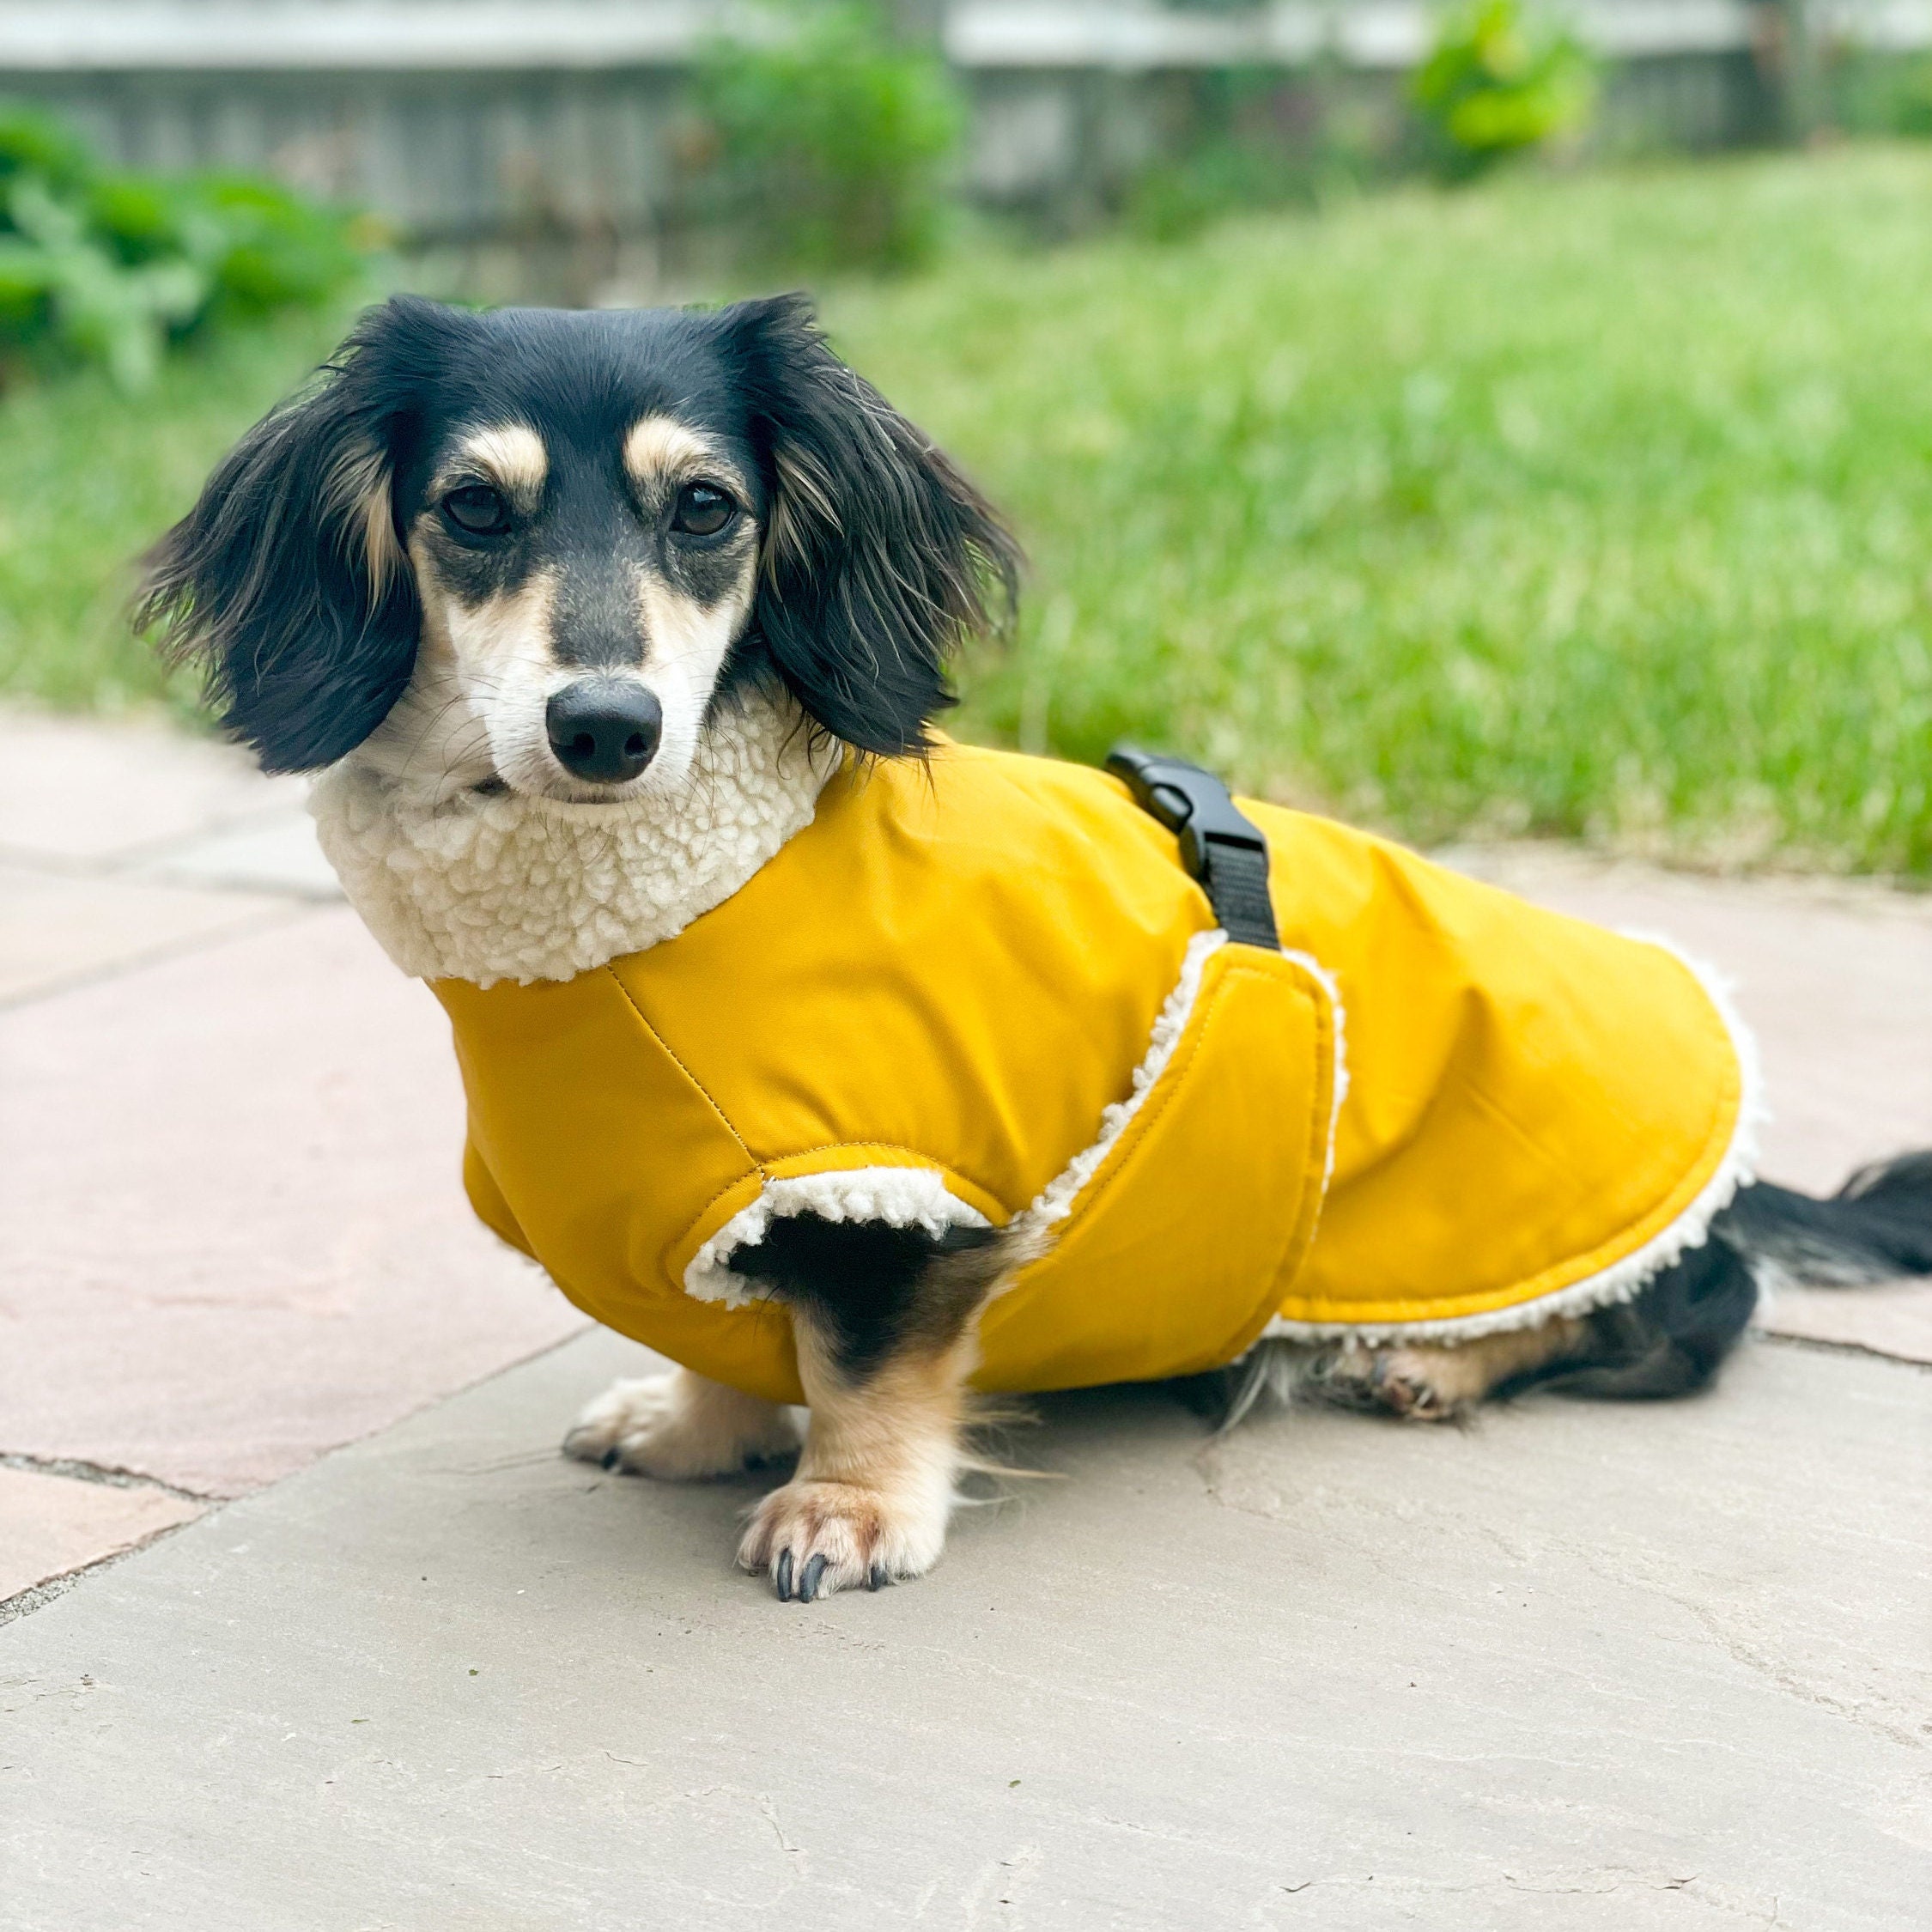 Dog Hoodie Clothes- Dog Basic Sweater Coat Cute Carrot Shape Warm Jacket Outdoor Pet Cold Weather Clothes Outfit Outerwear for Small Dogs Cats Puppy